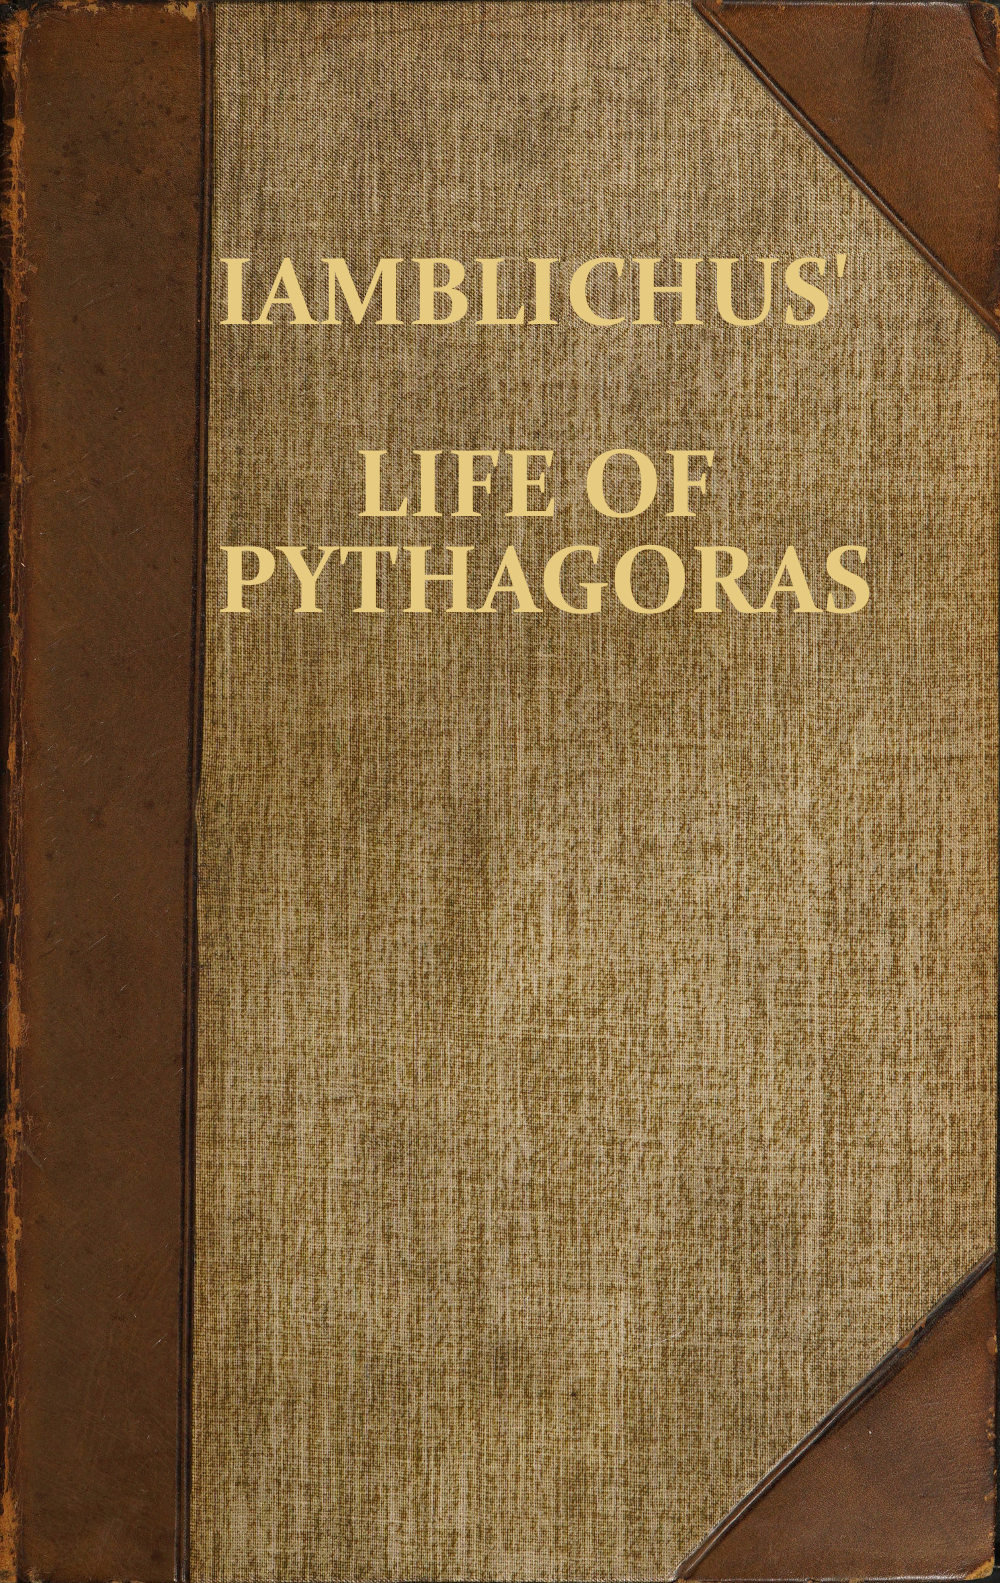 Iamblichus' Life of Pythagoras, or Pythagoric Life&#10;Accompanied by Fragments of the Ethical Writings of certain Pythagoreans in the Doric dialect; and a collection of Pythagoric Sentences from Stobaeus and others, which are omitted by Gale in his Opuscula Mythologica, and have not been noticed by any editor